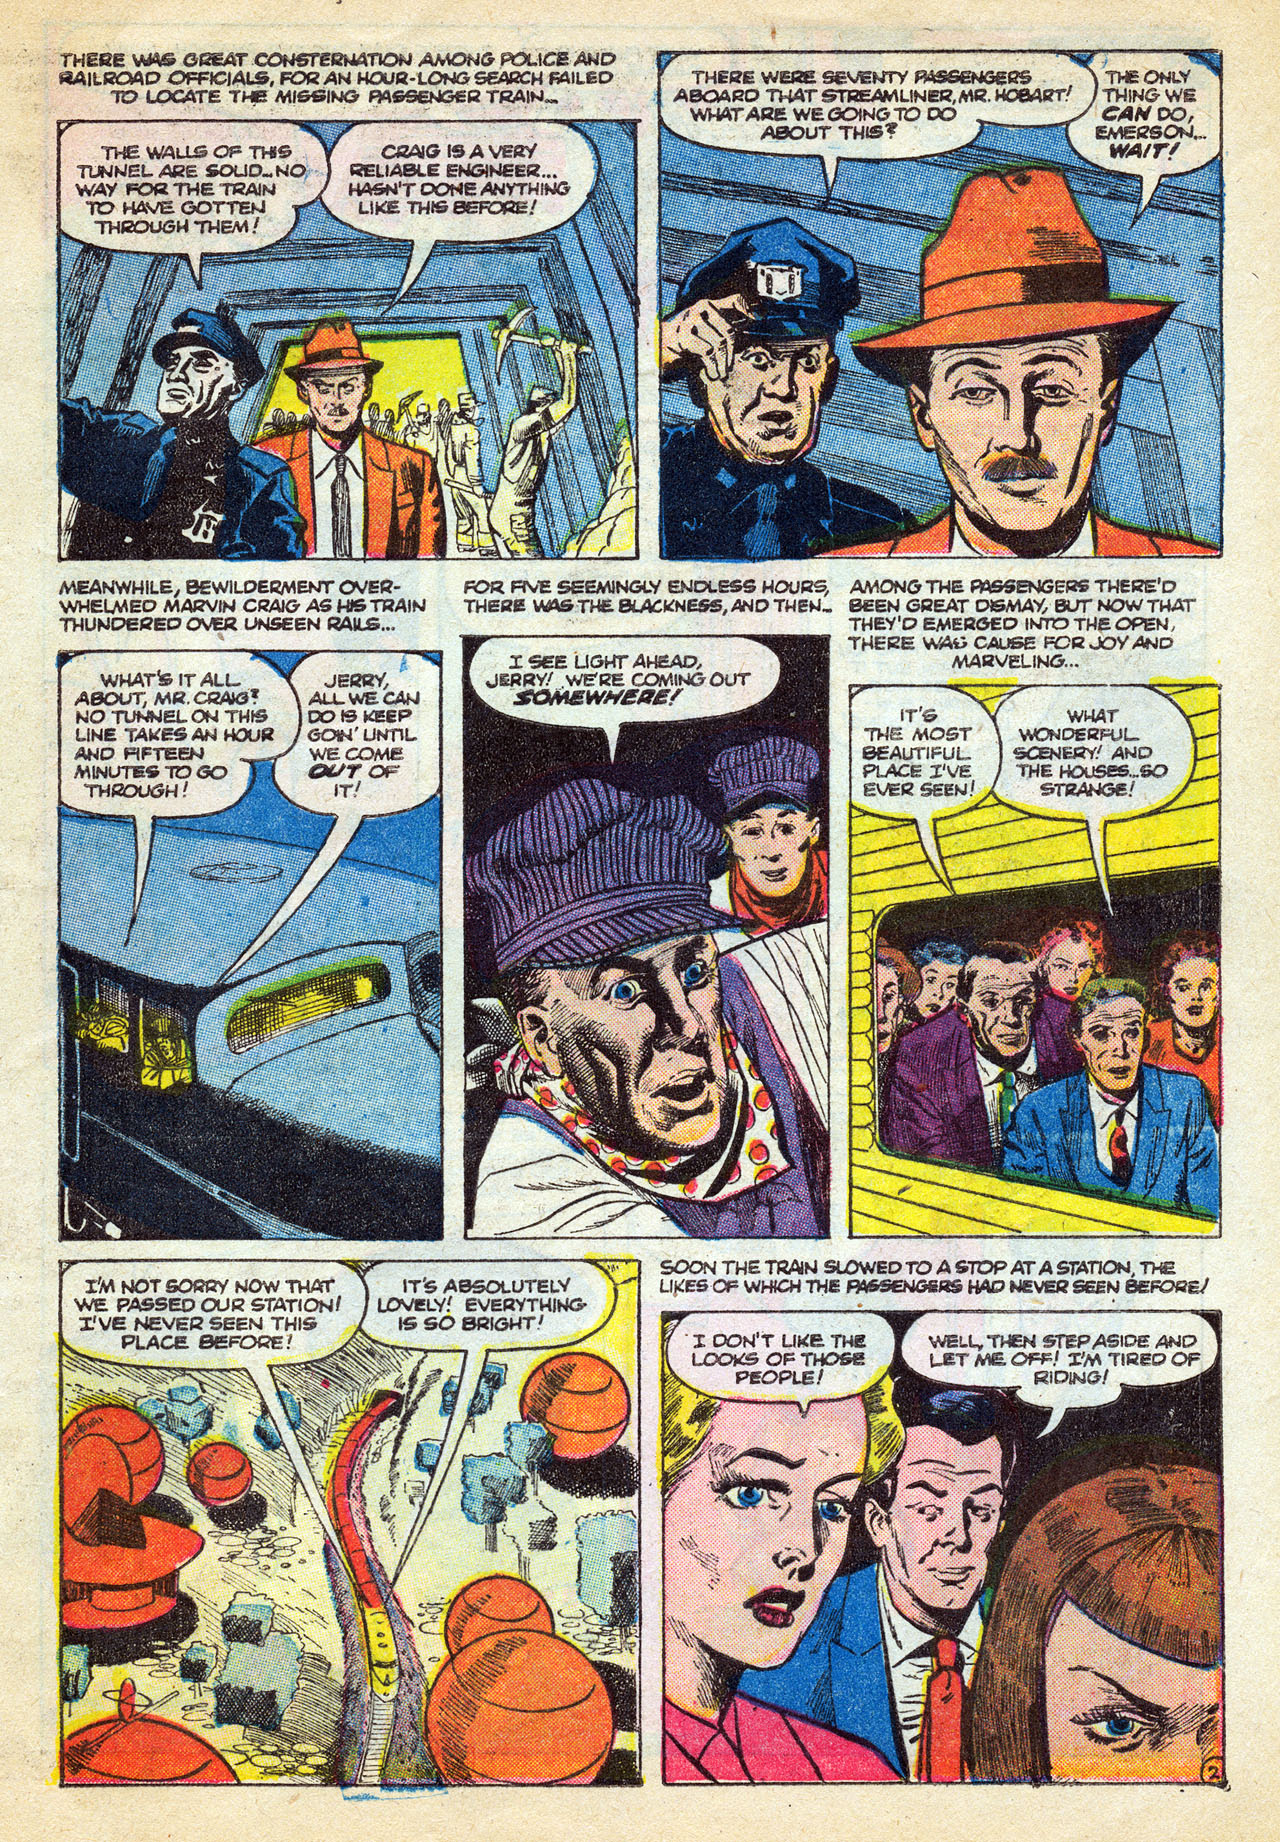 Marvel Tales (1949) 140 Page 28